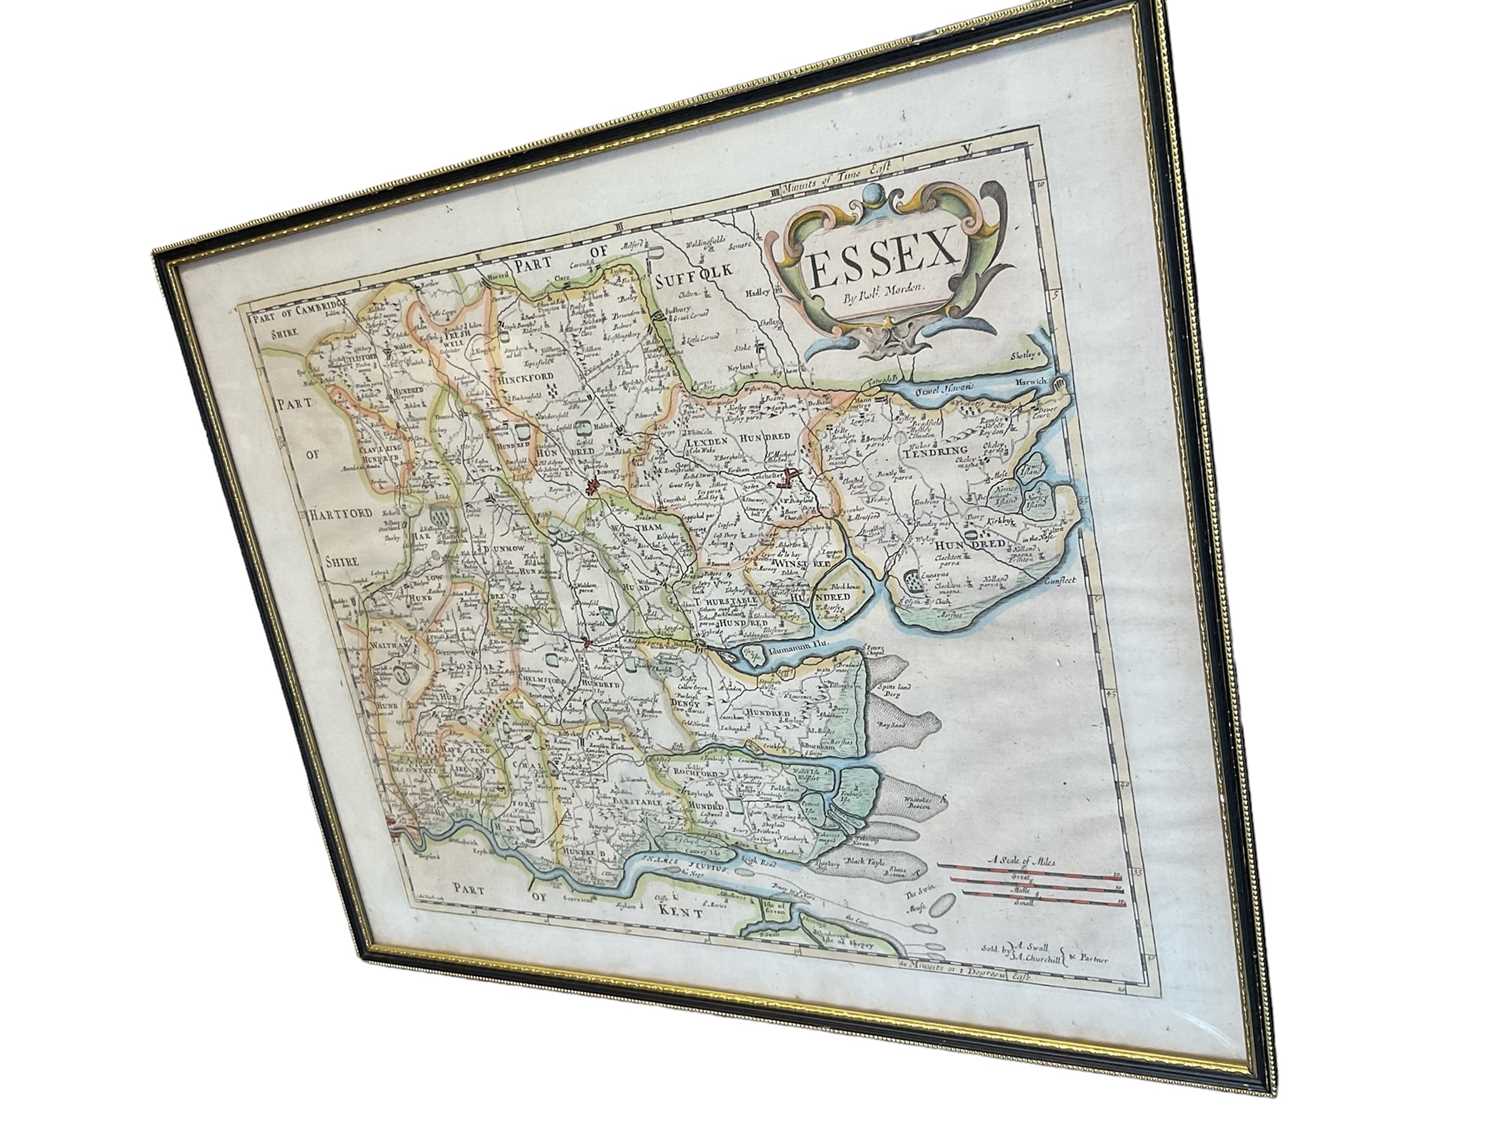 Robert Morden, 18th century hand tinted engraved map of Essex